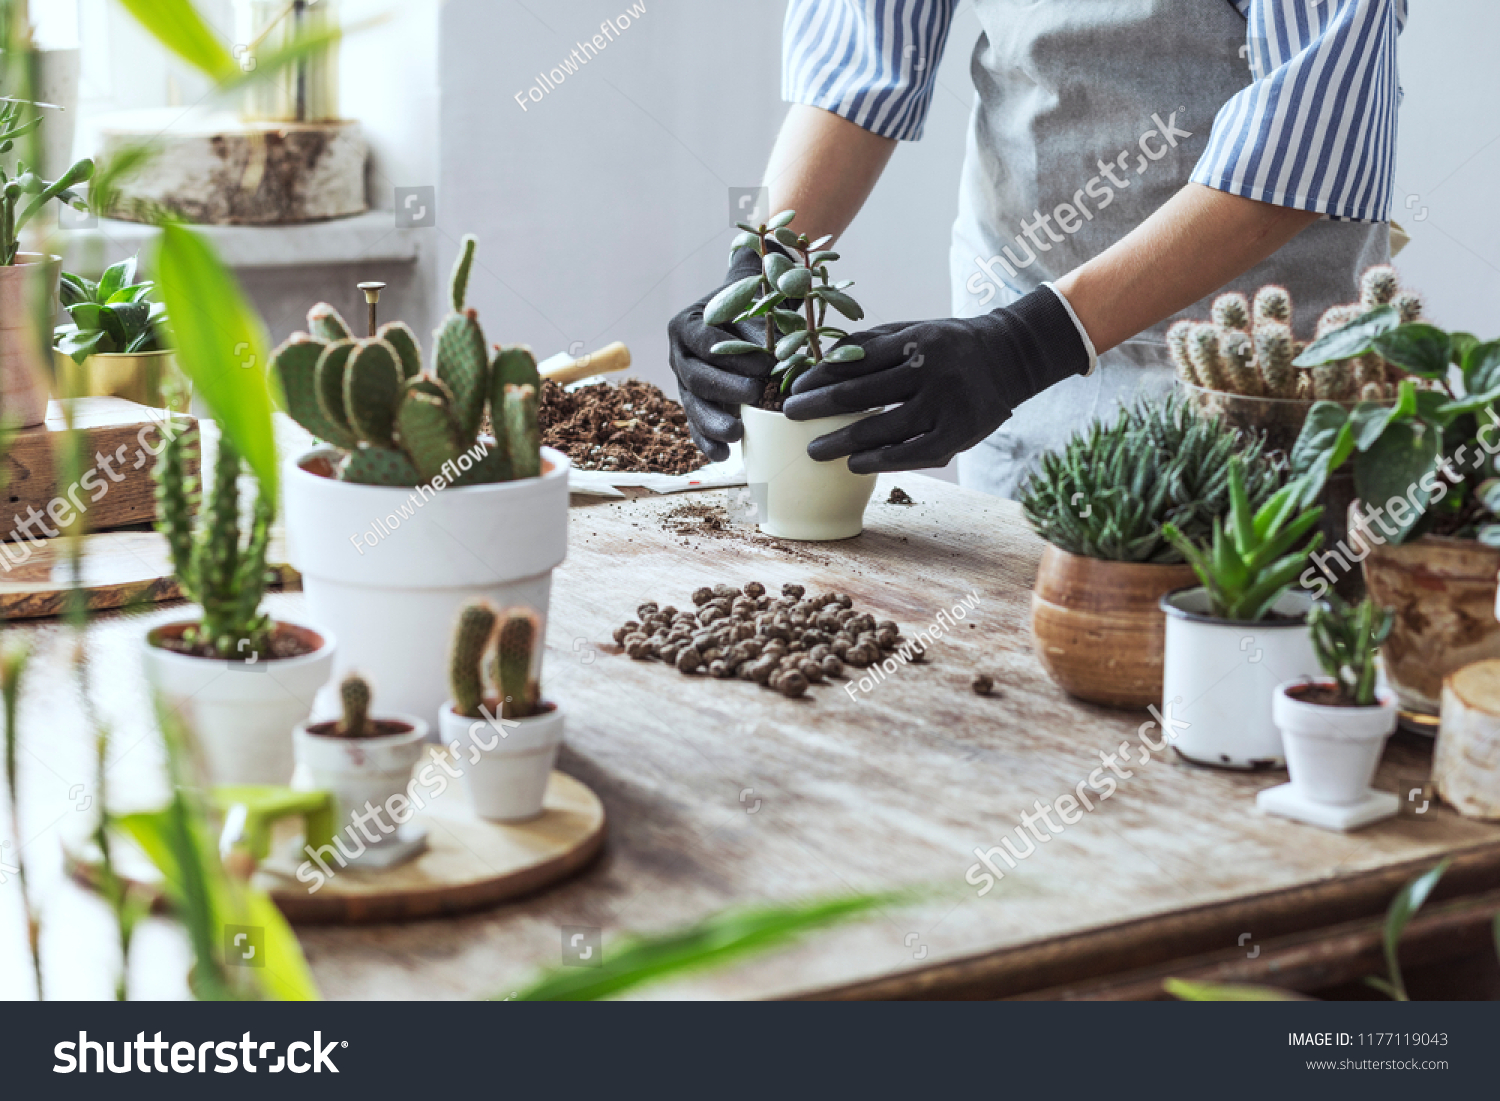 Woman gardeners hand transplanting cacti and succulents in cement pots on the wooden table. Concept of home garden. #1177119043